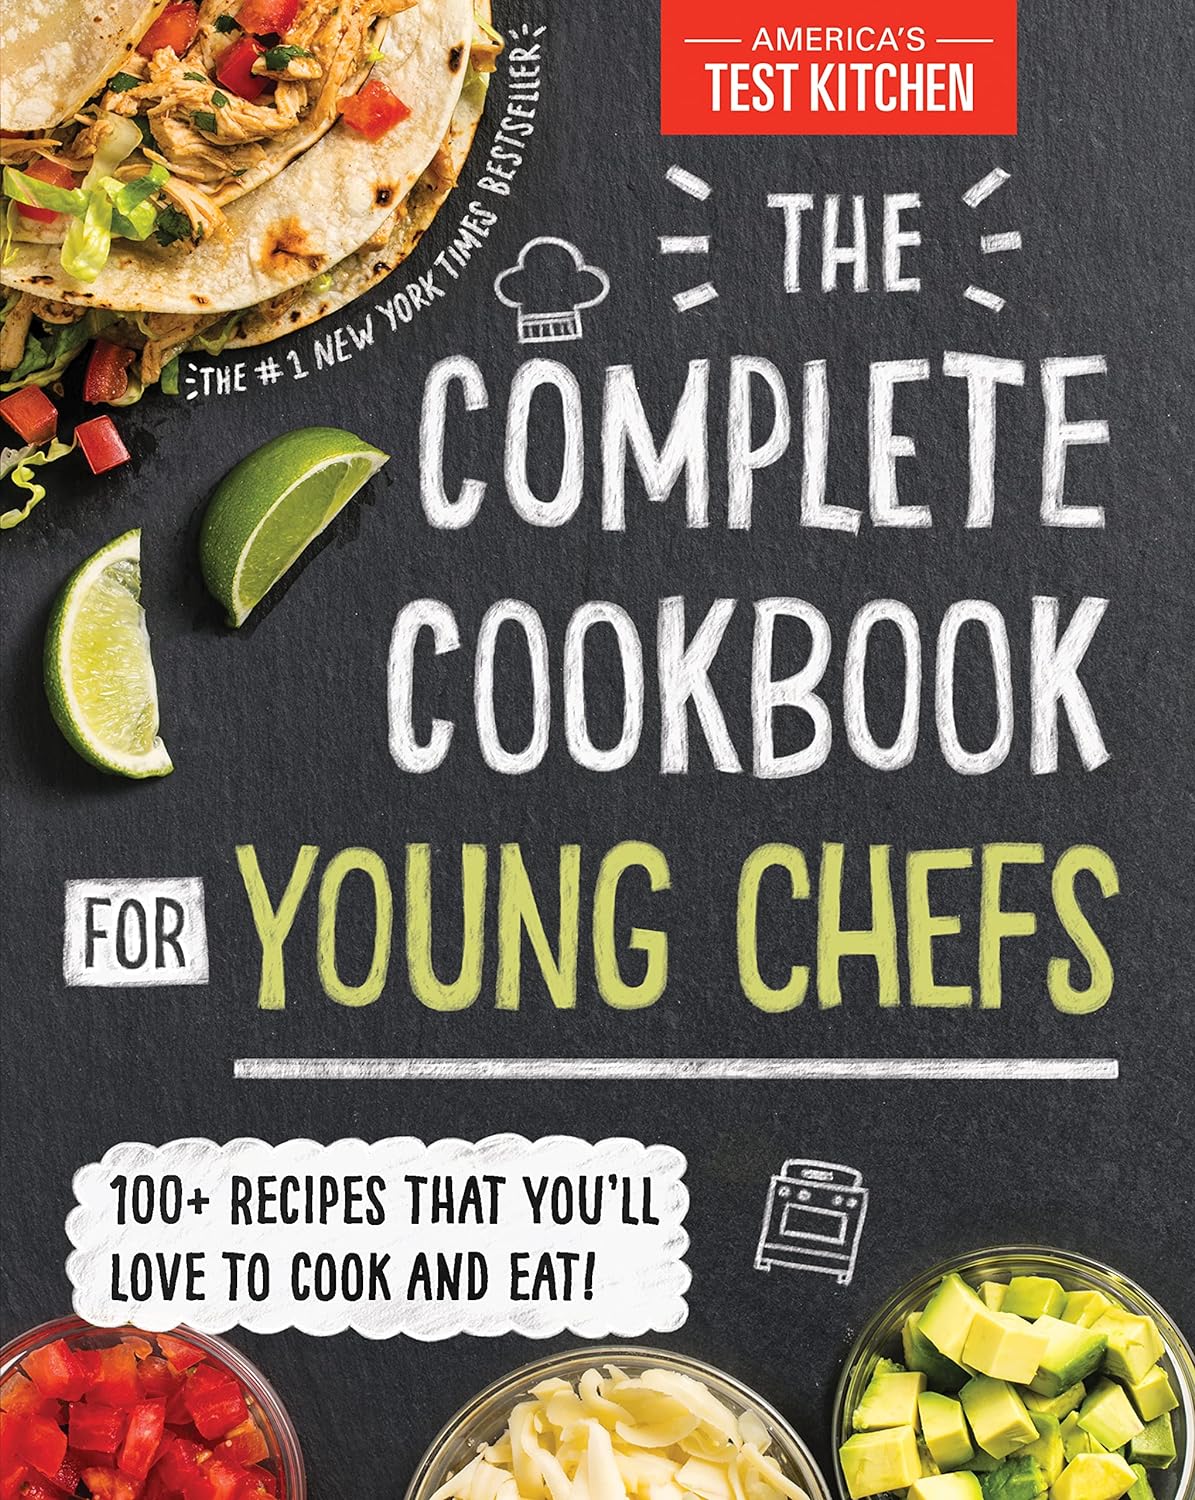 The Complete Cookbook for Young Chefs: 100+ Recipes that Youll Love to Cook and Eat     Hardcover – October 16, 2018